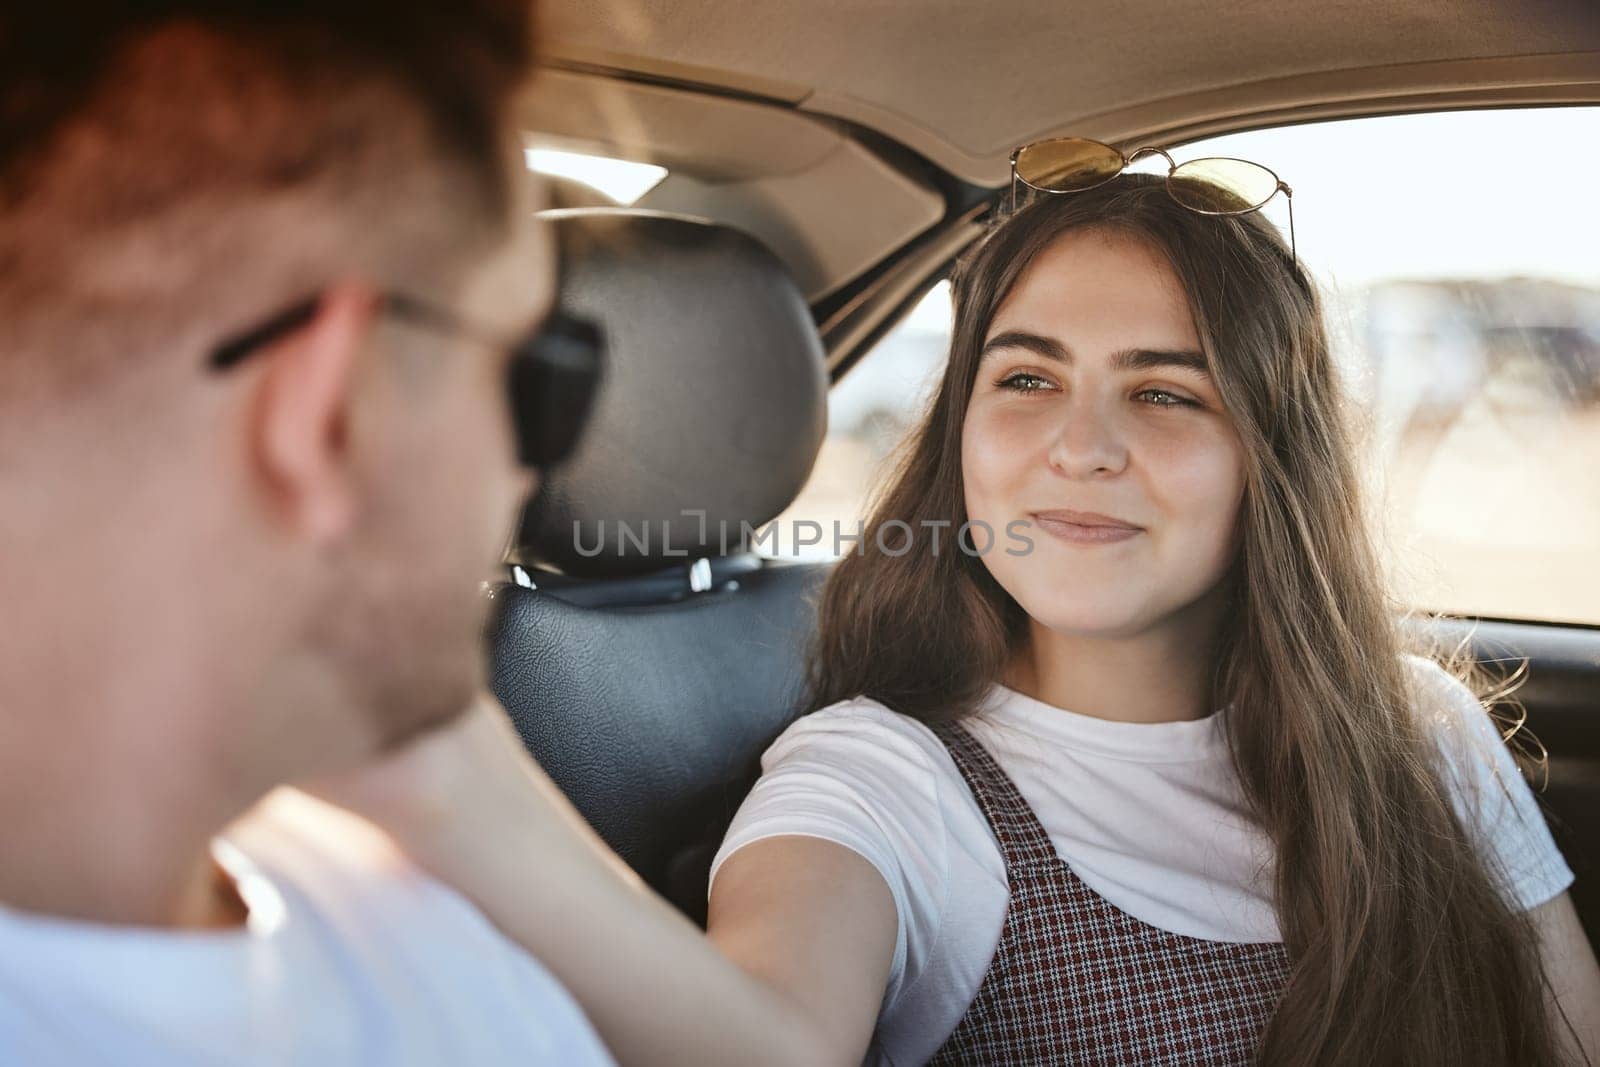 Love, care and couple on car road trip for fun travel adventure, bonding and enjoy romantic quality time together. Peace, wellness and freedom for young gen z man and woman in motor transportation.